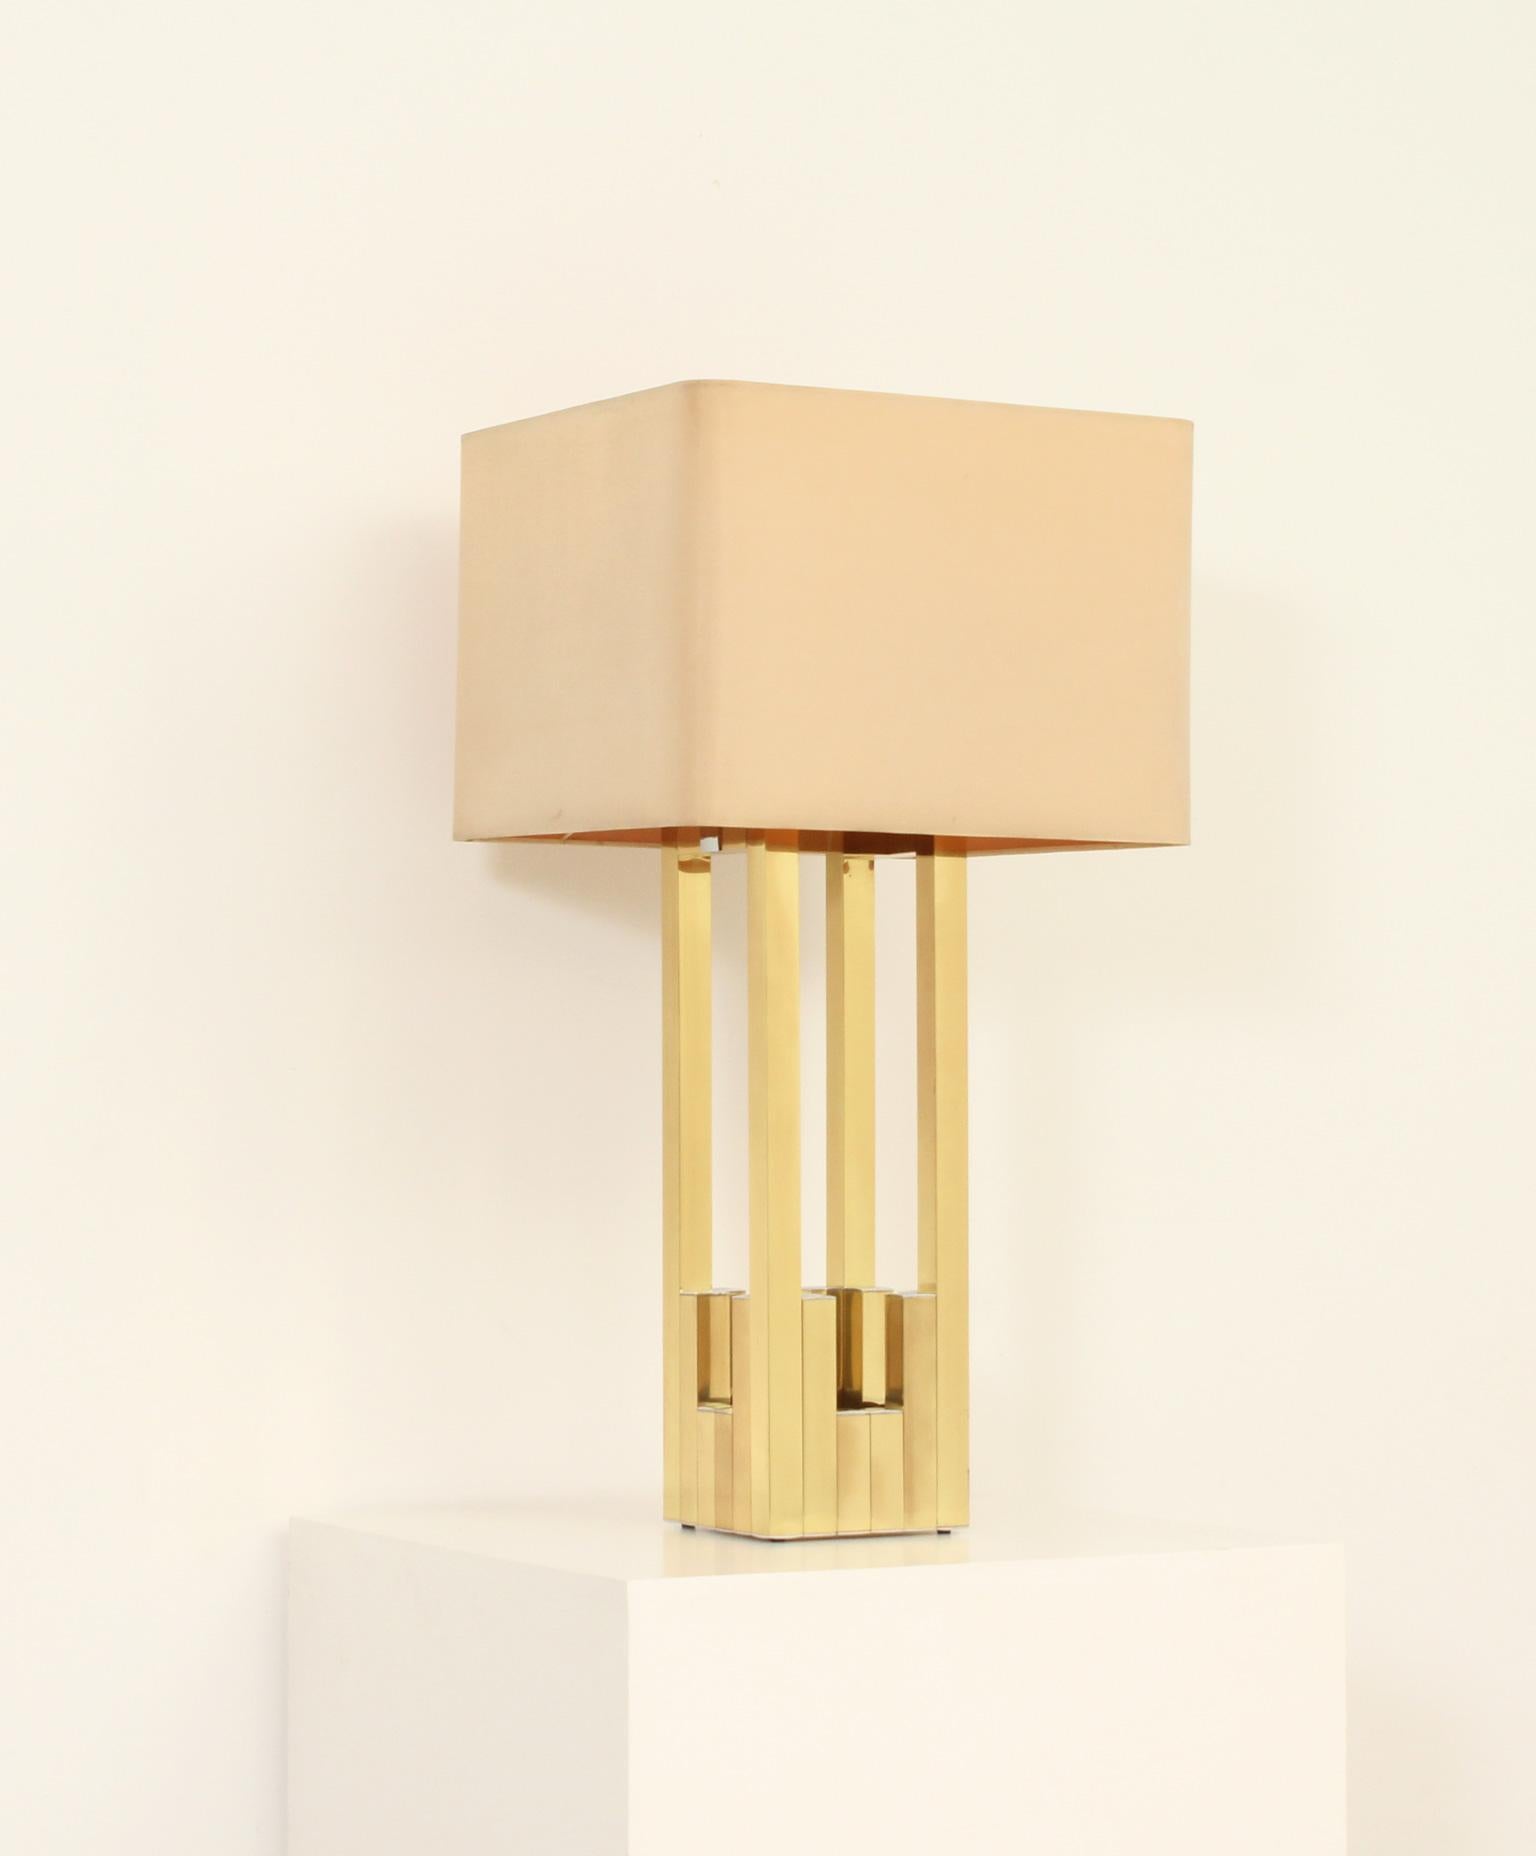 Spanish Large Lumica Brass Table Lamp, Spain, 1970s For Sale